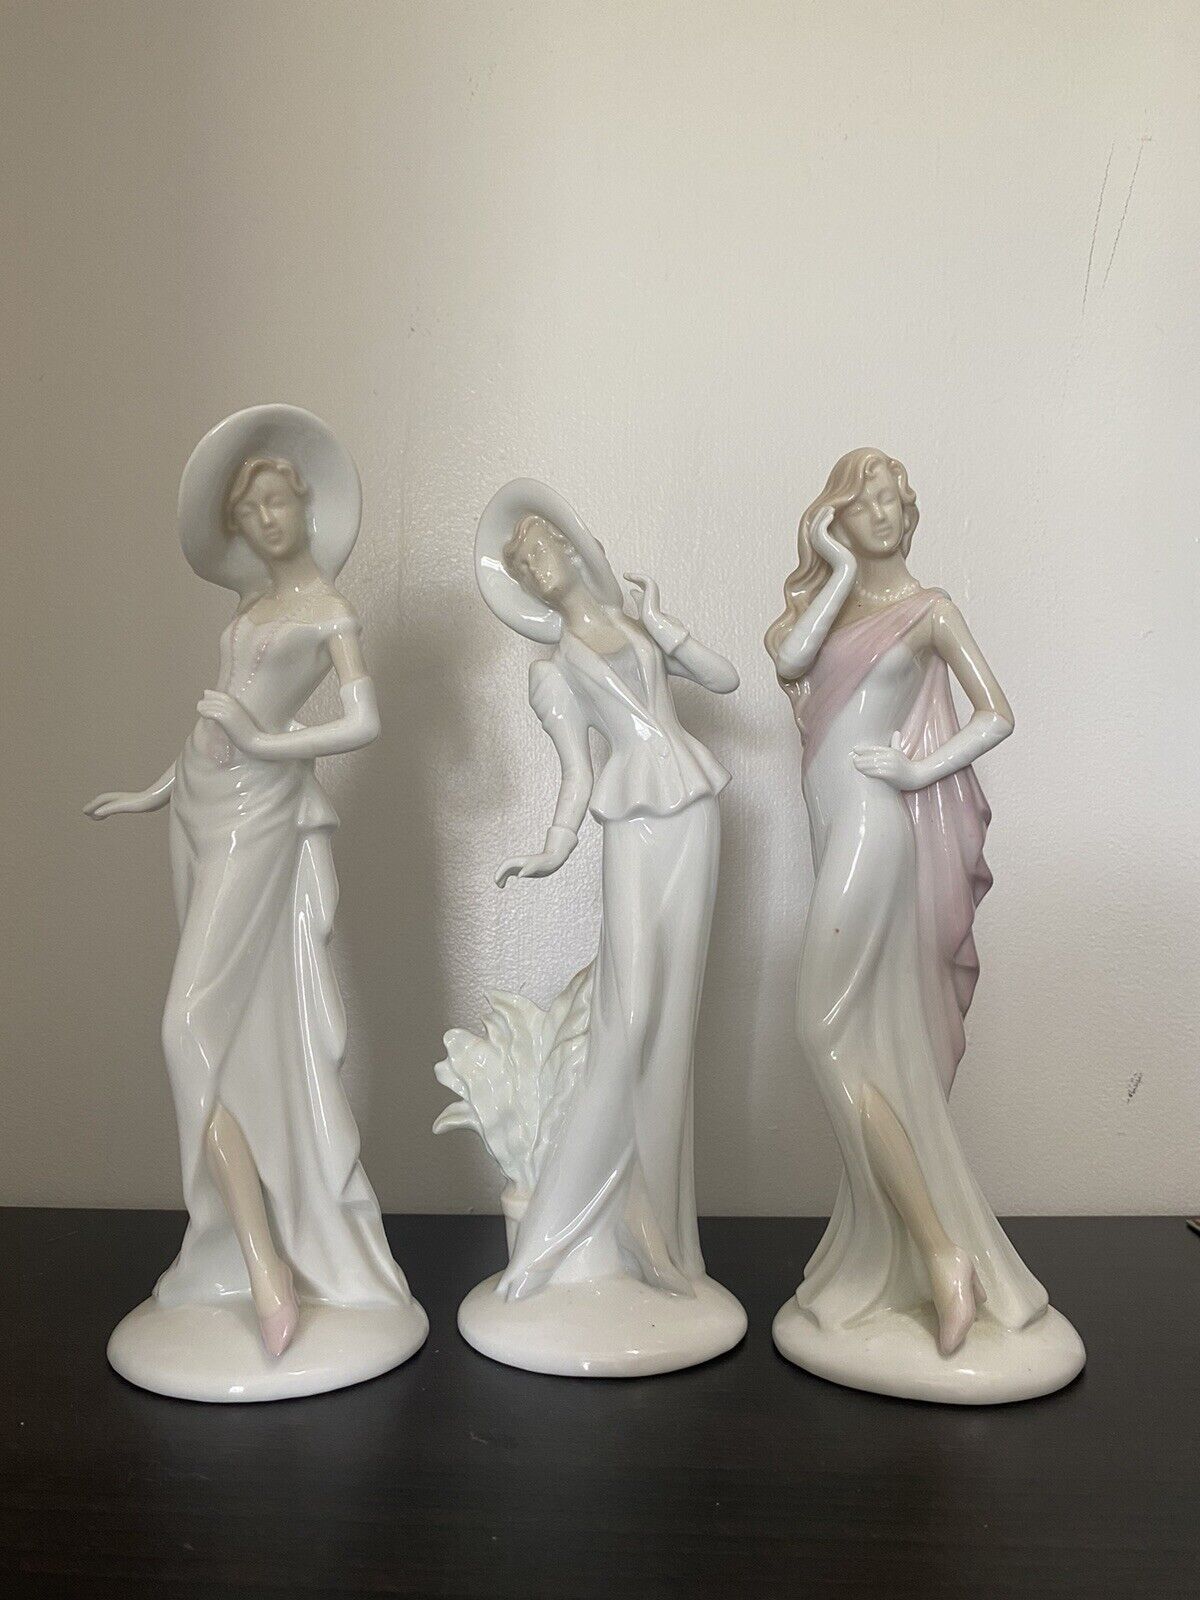 Lot 3 Porcelain Women Figurine Muted Baby Pink Vintage Collectible Victorian